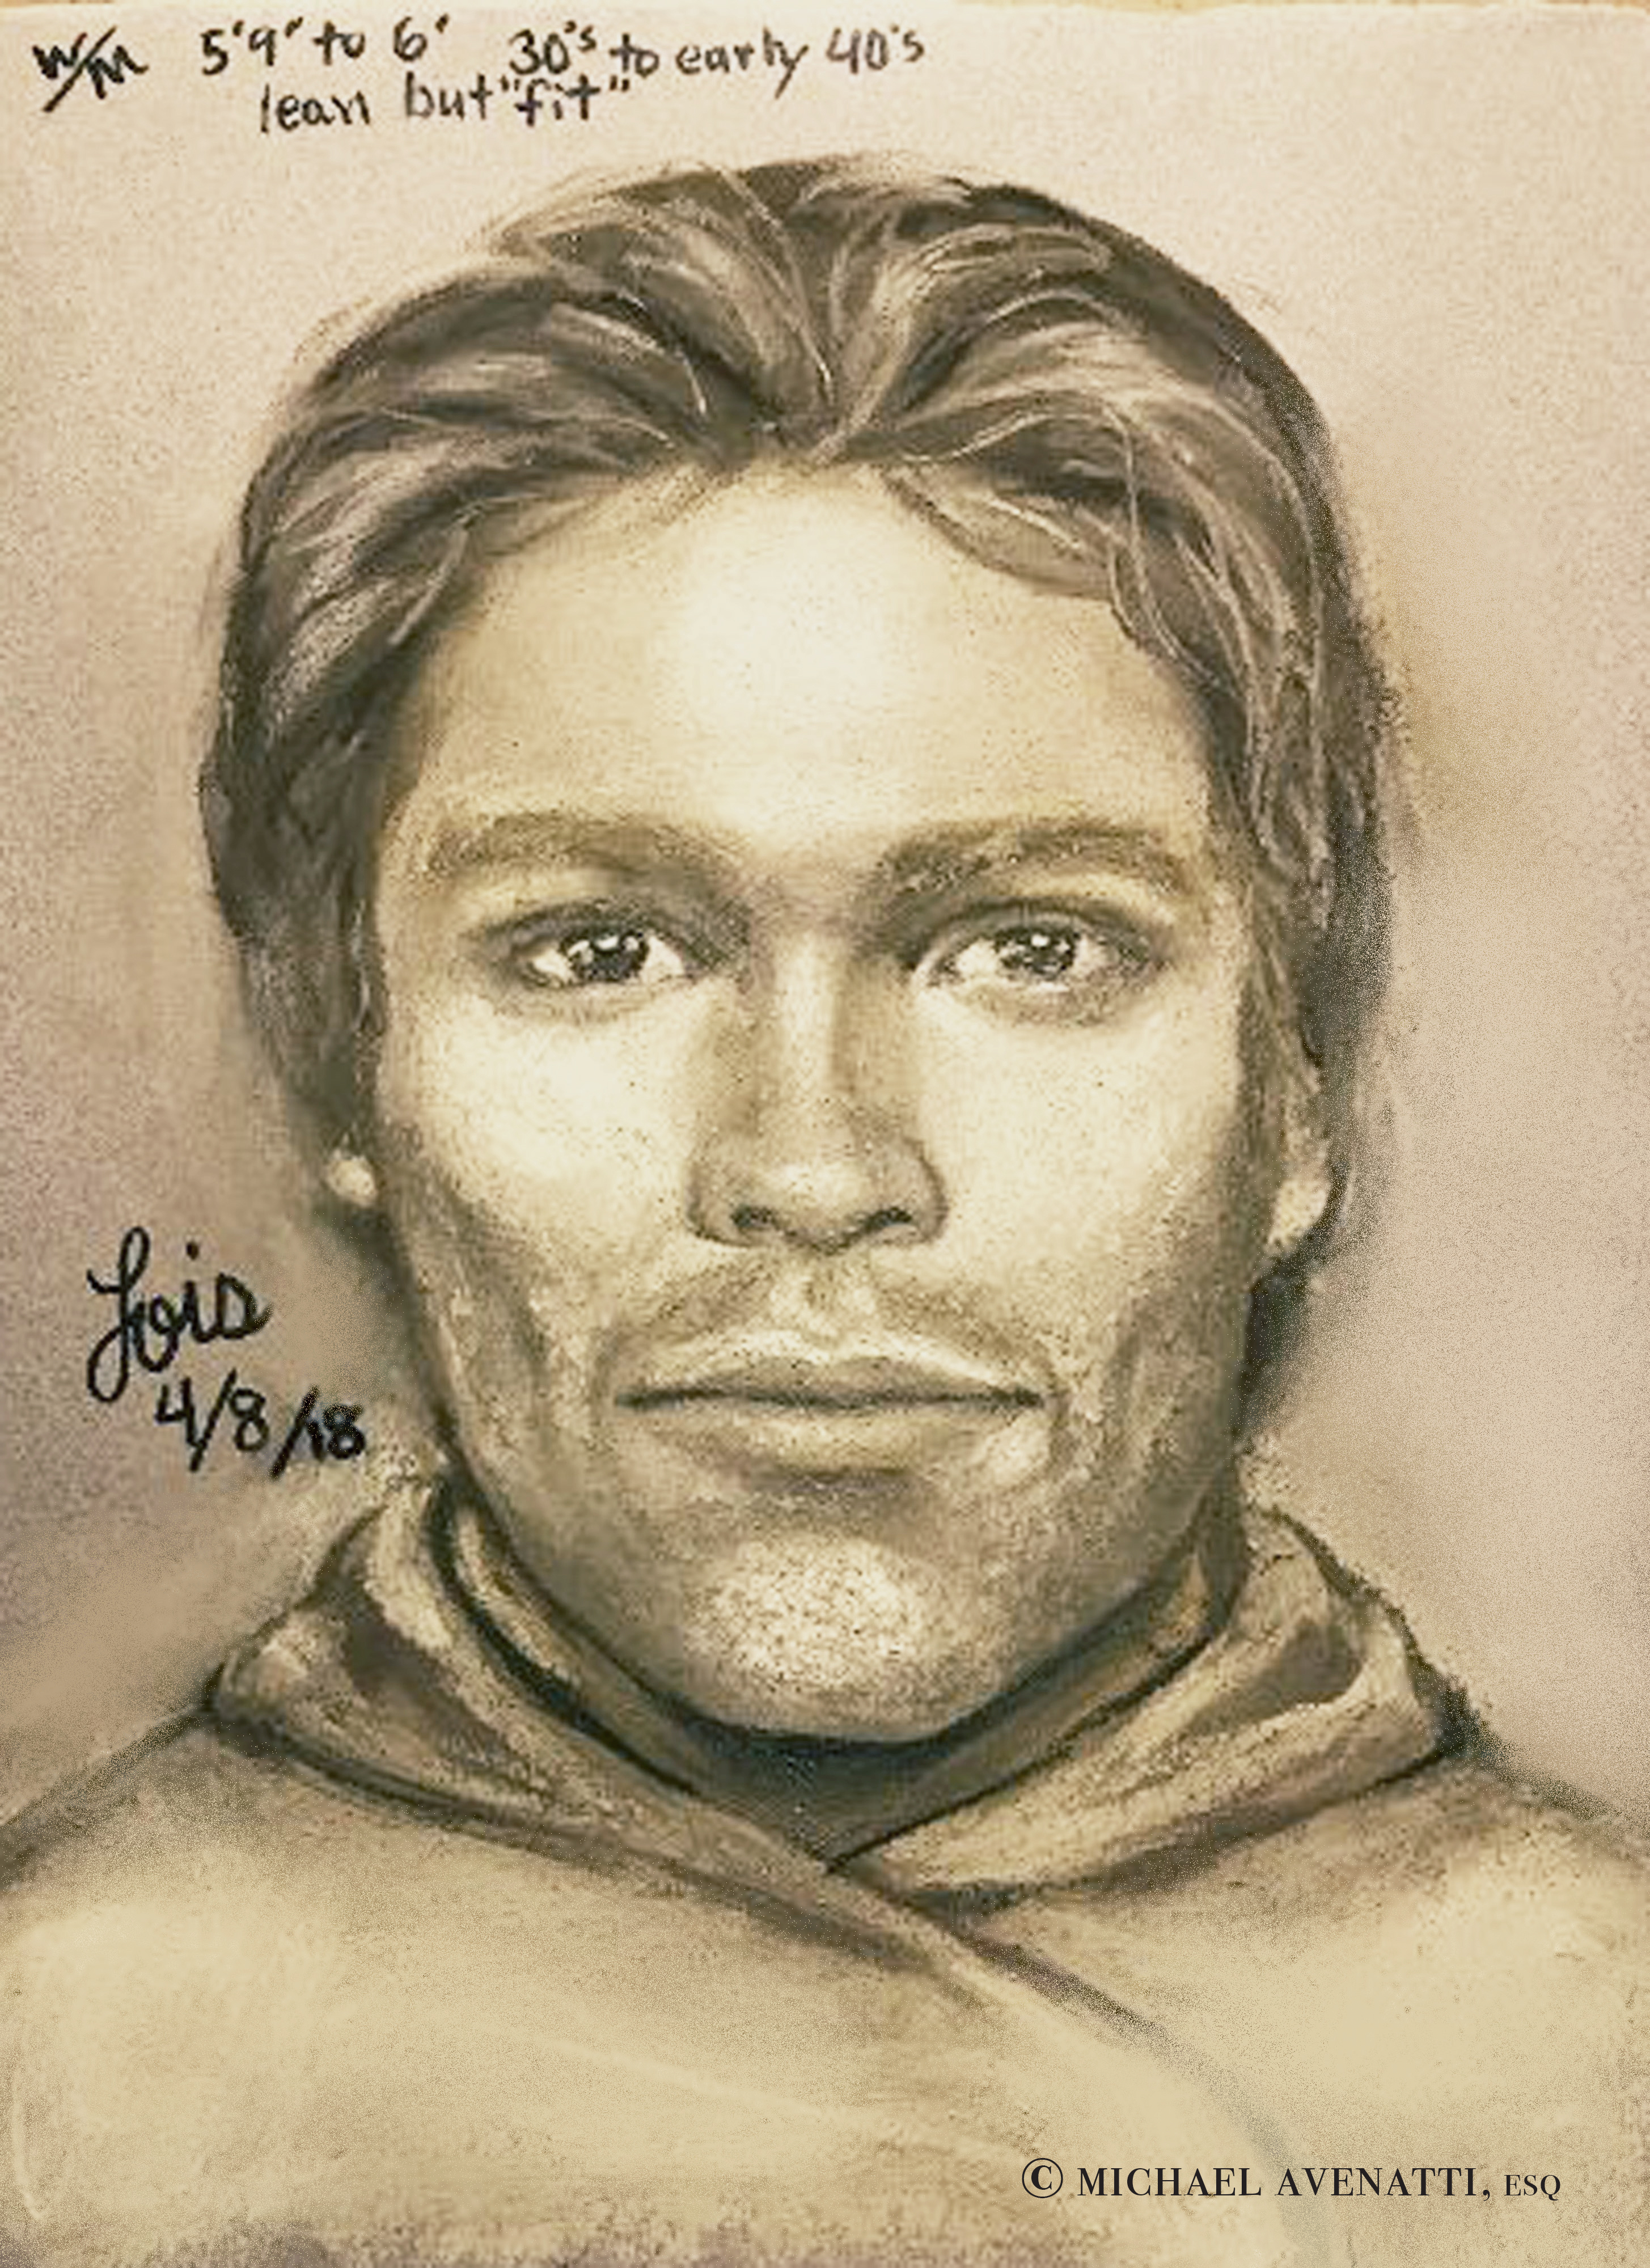 A composite sketch of the man Stormy Daniels says threatened her in a Las Vegas parking lot in 2011 to remain quiet about her affair with President Trump (Michael Avenatti via AP)